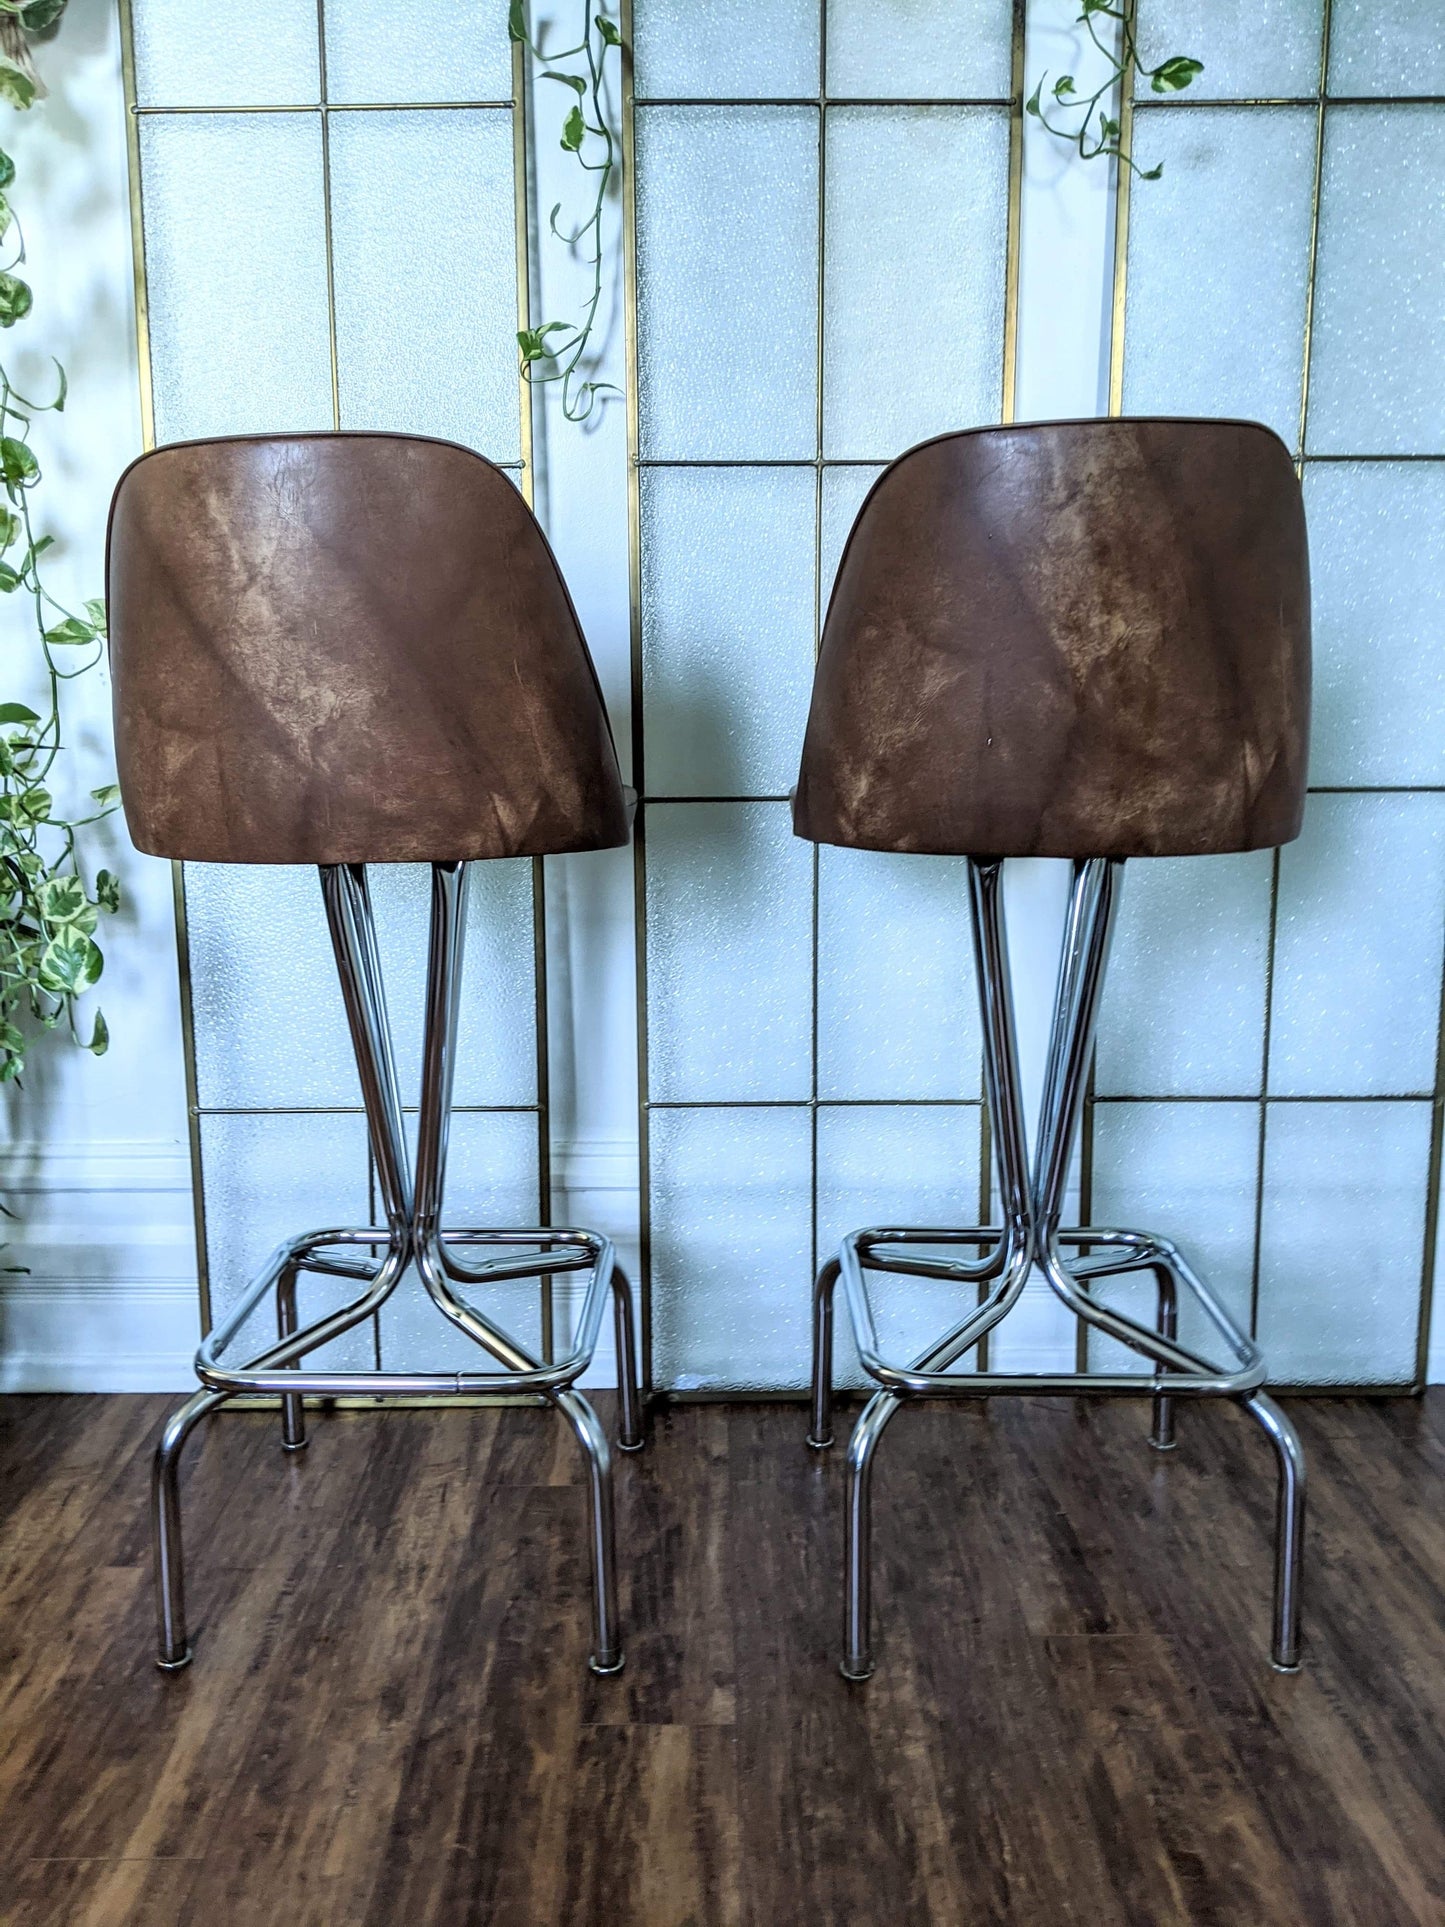 The 70’s Lounge Stools